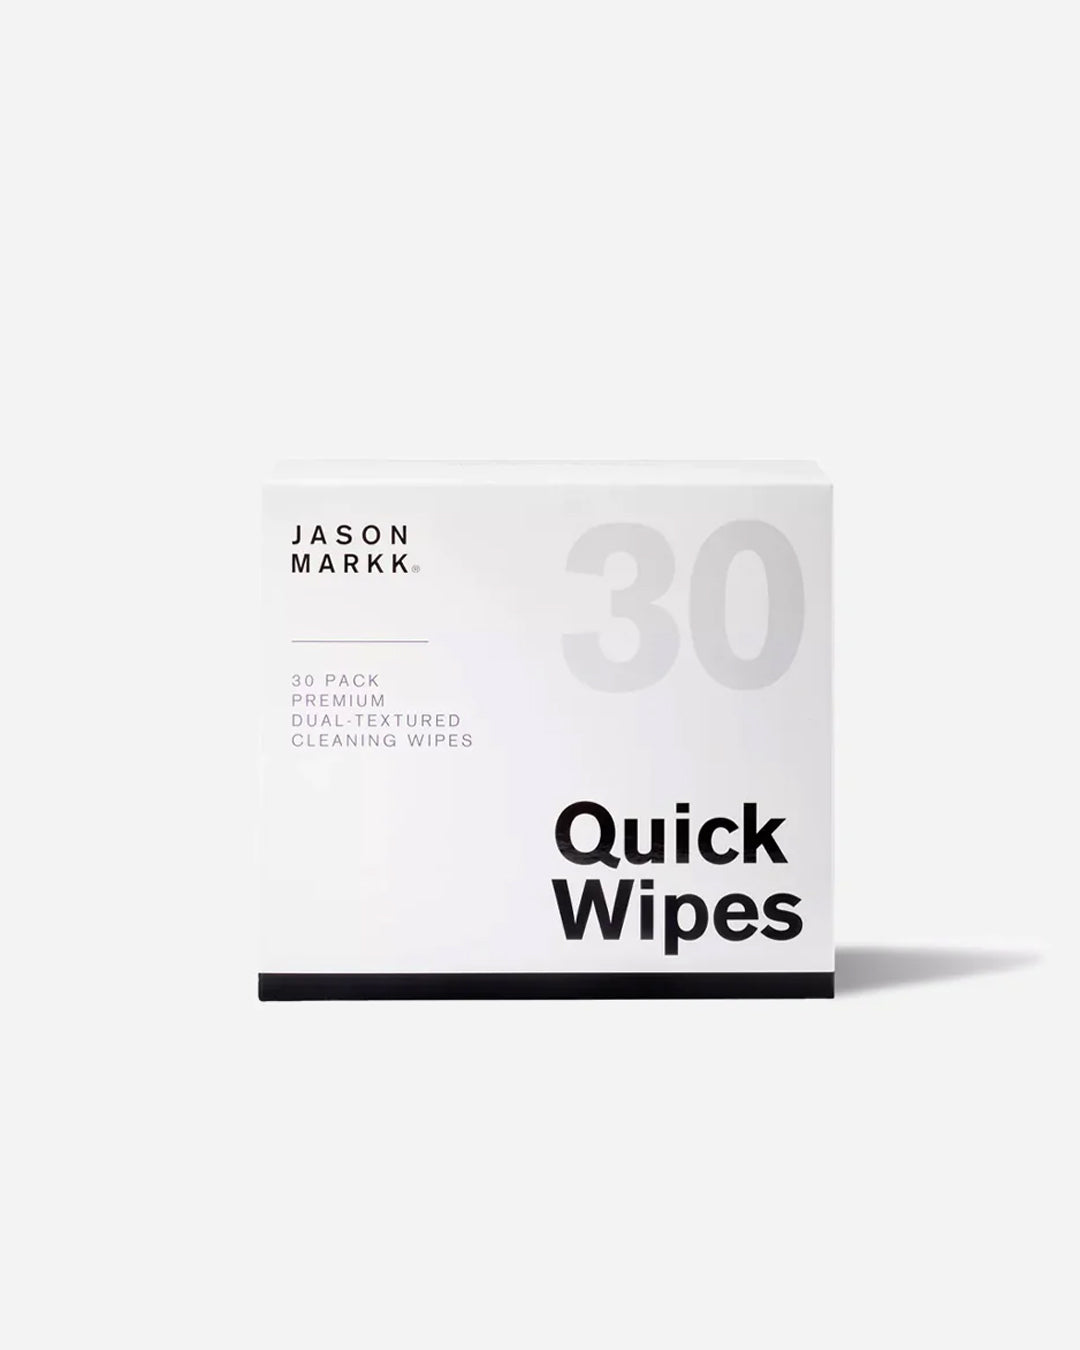 QUICK WIPES-30 PACKS